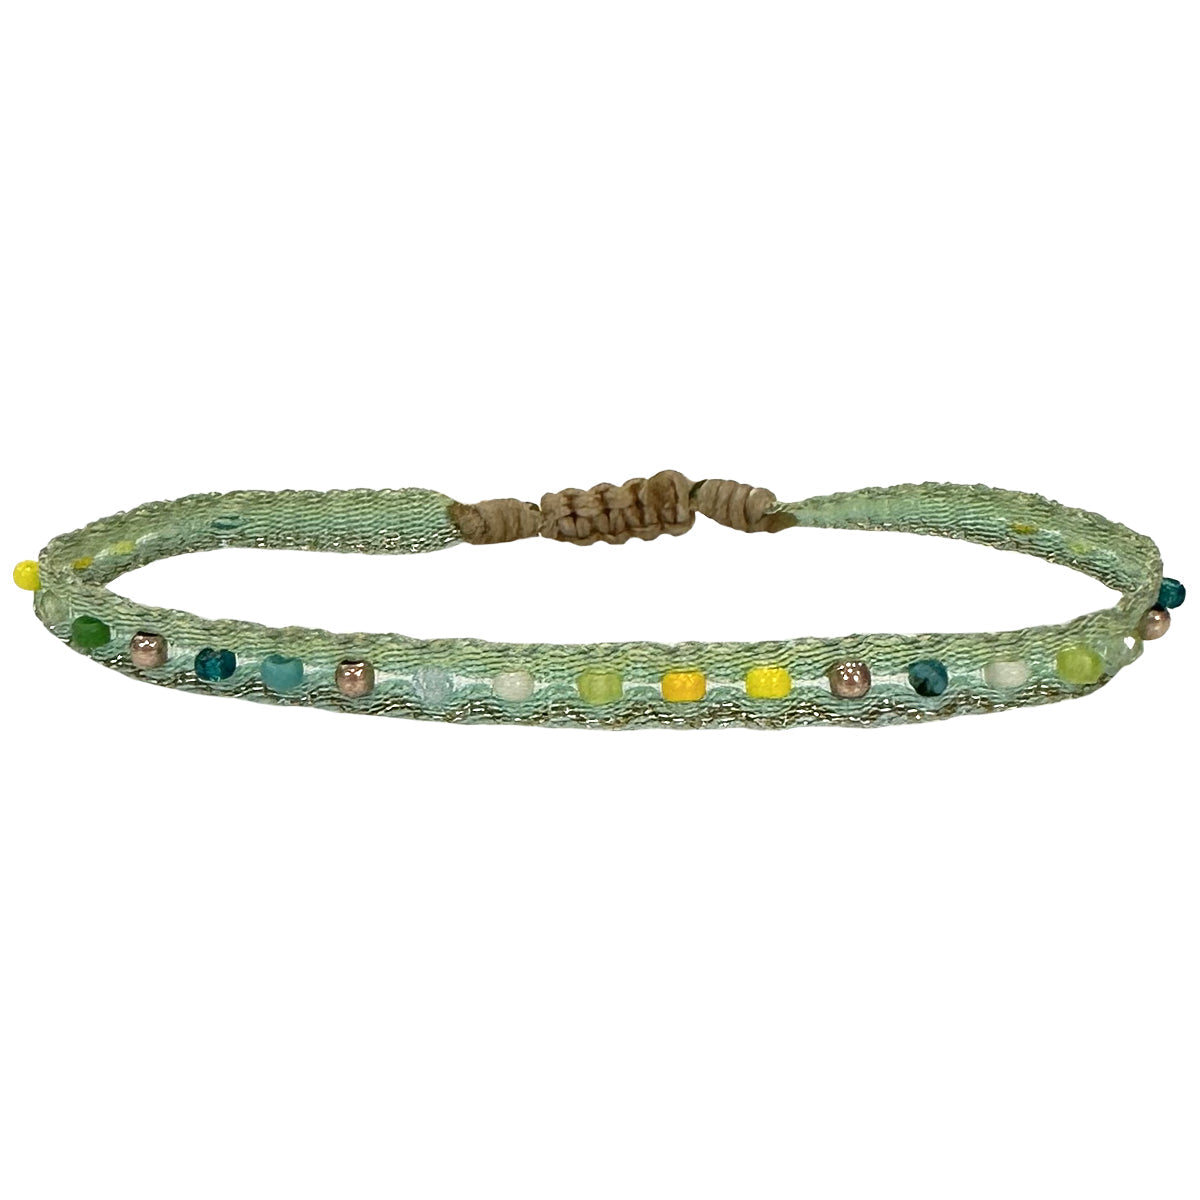 COLOURFUL HANDWOVEN BRACELET IN GREEN TONES AND ROSE GOLD DETAILS